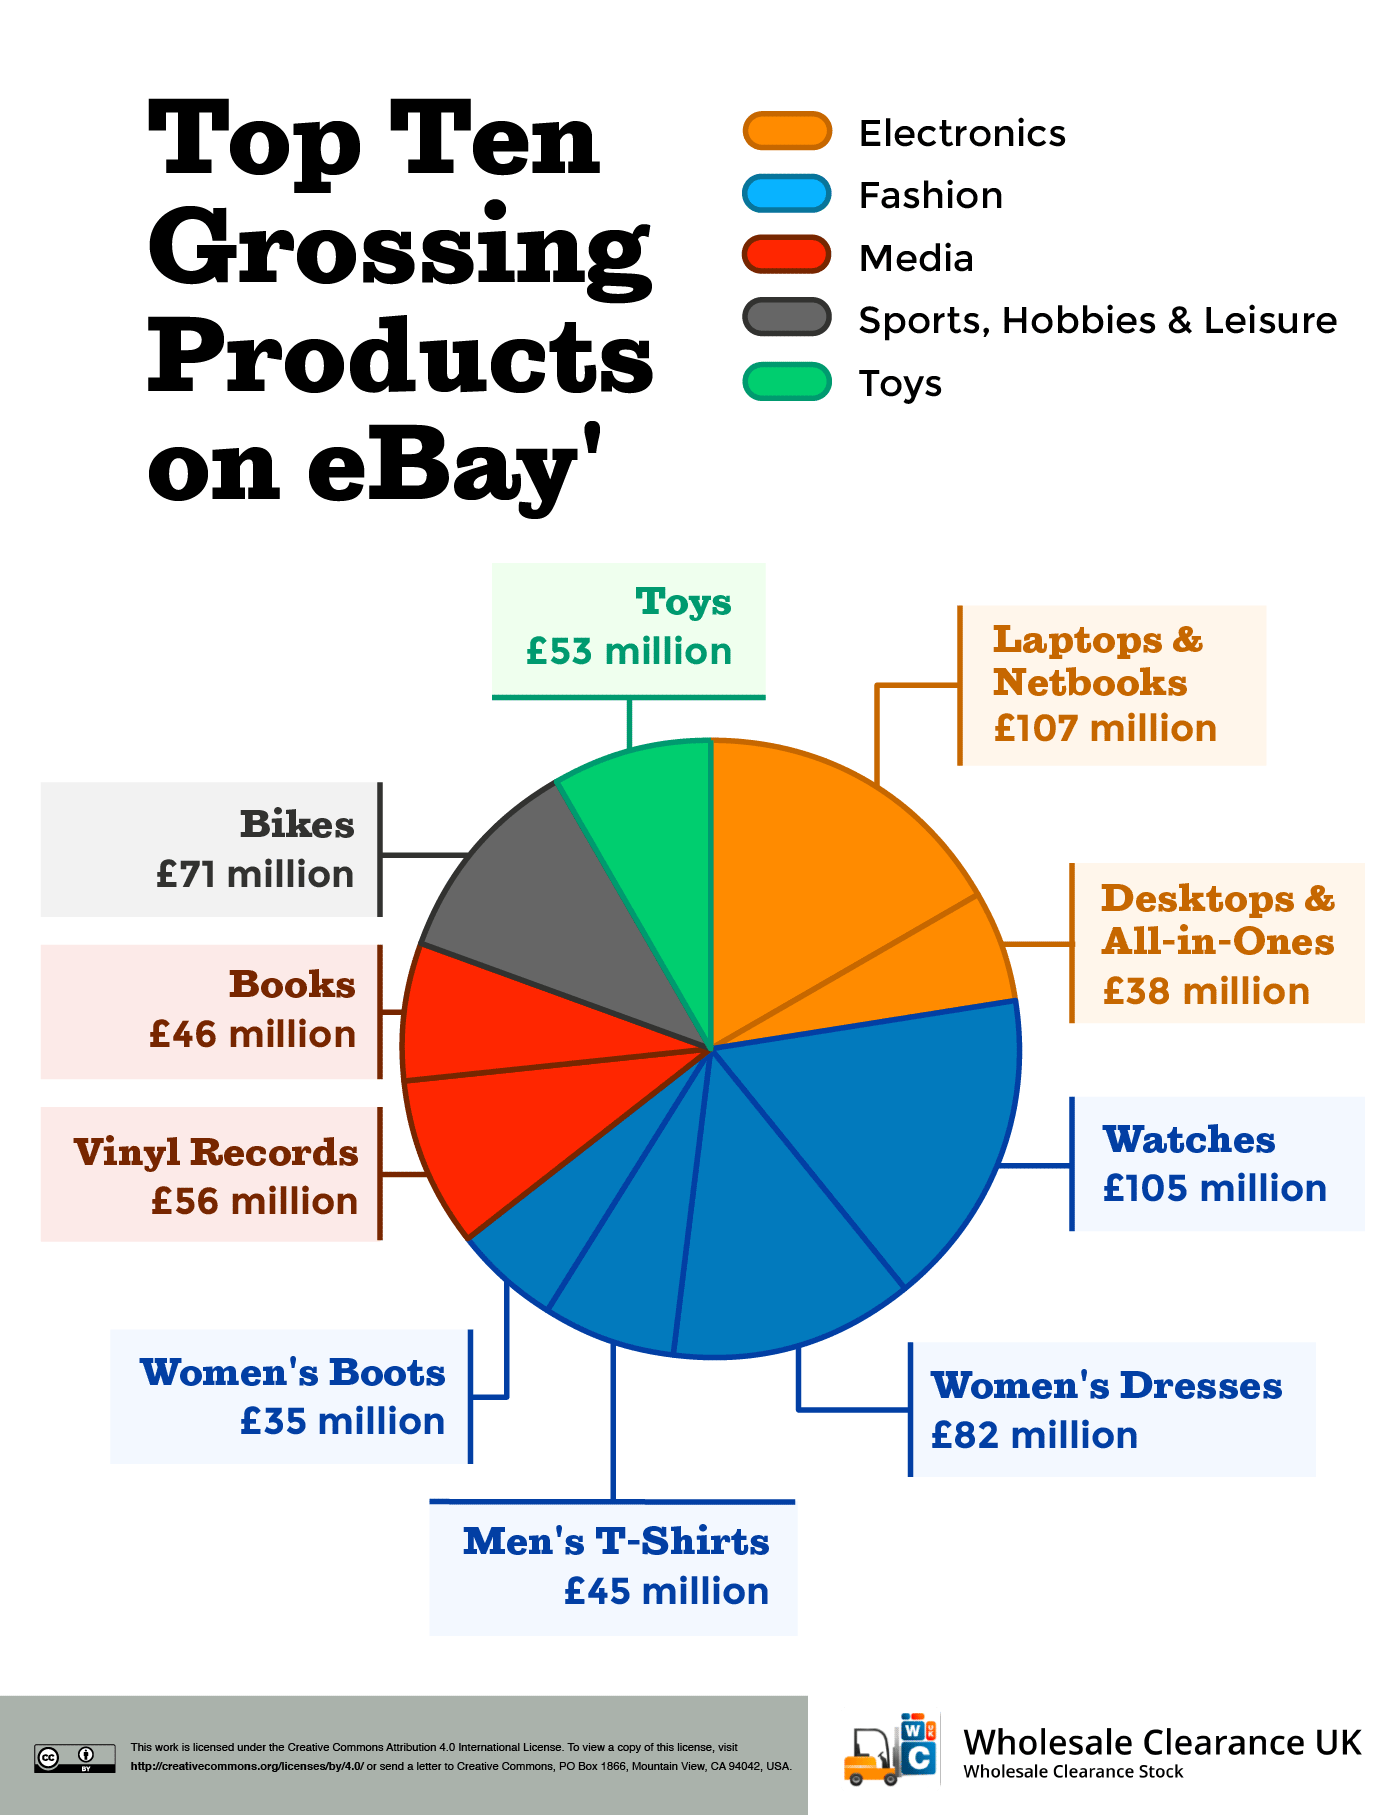 https://www.wholesaleclearance.co.uk/blog/wp-content/uploads/2023/01/Top-10-grossing-products-on-ebay-2023.png